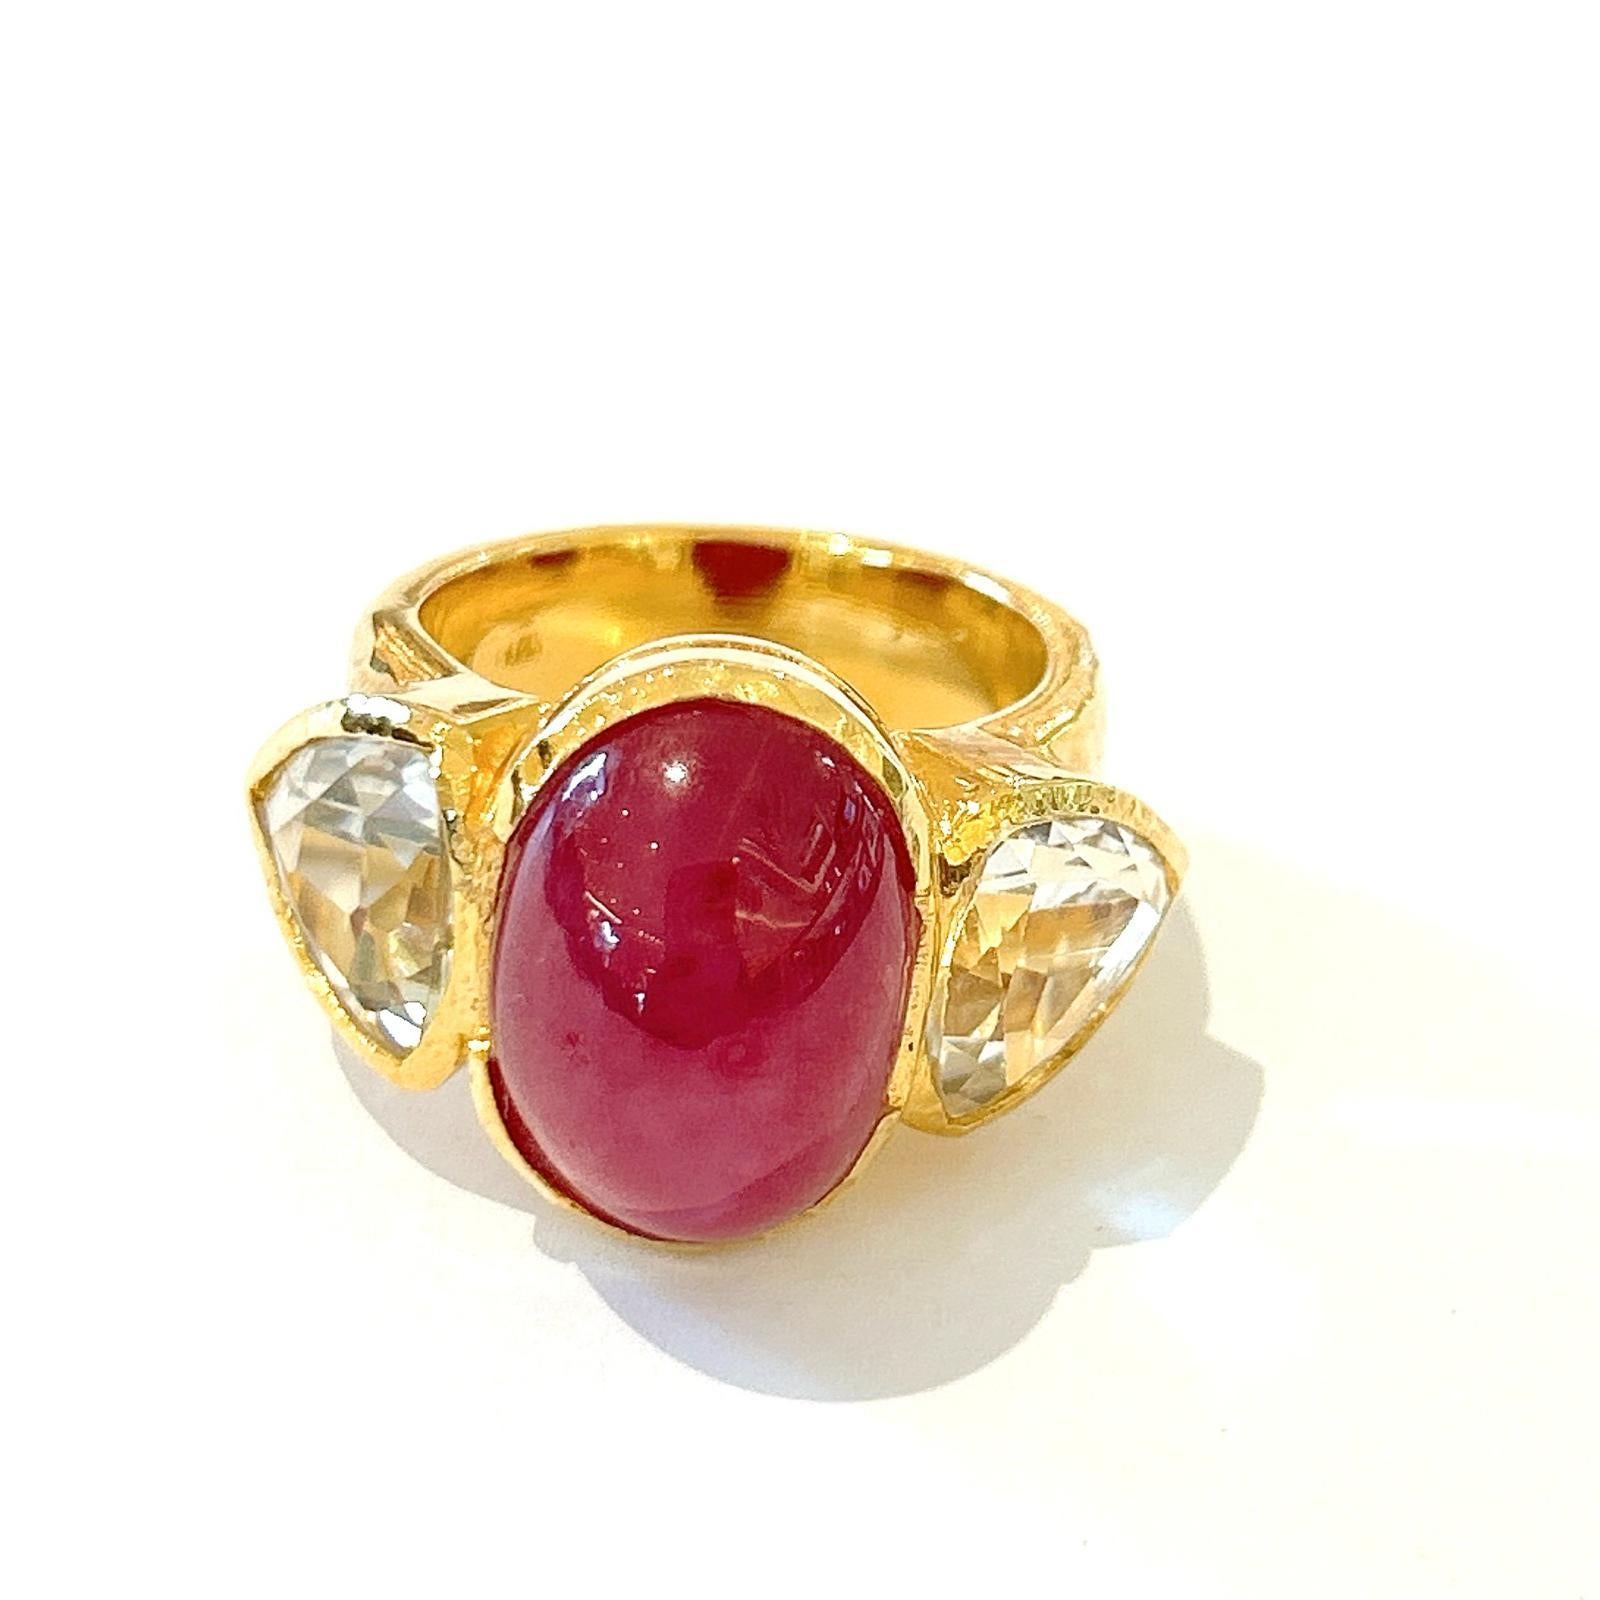 Bochic “Orient” Ruby & White Topaz Vintage 3 Gem Ring Set 18K & Silver 

Red natural ruby, Oval cabochon shape - 13 carats 
White natural topaz, 7 carats 

This Ring is from the 